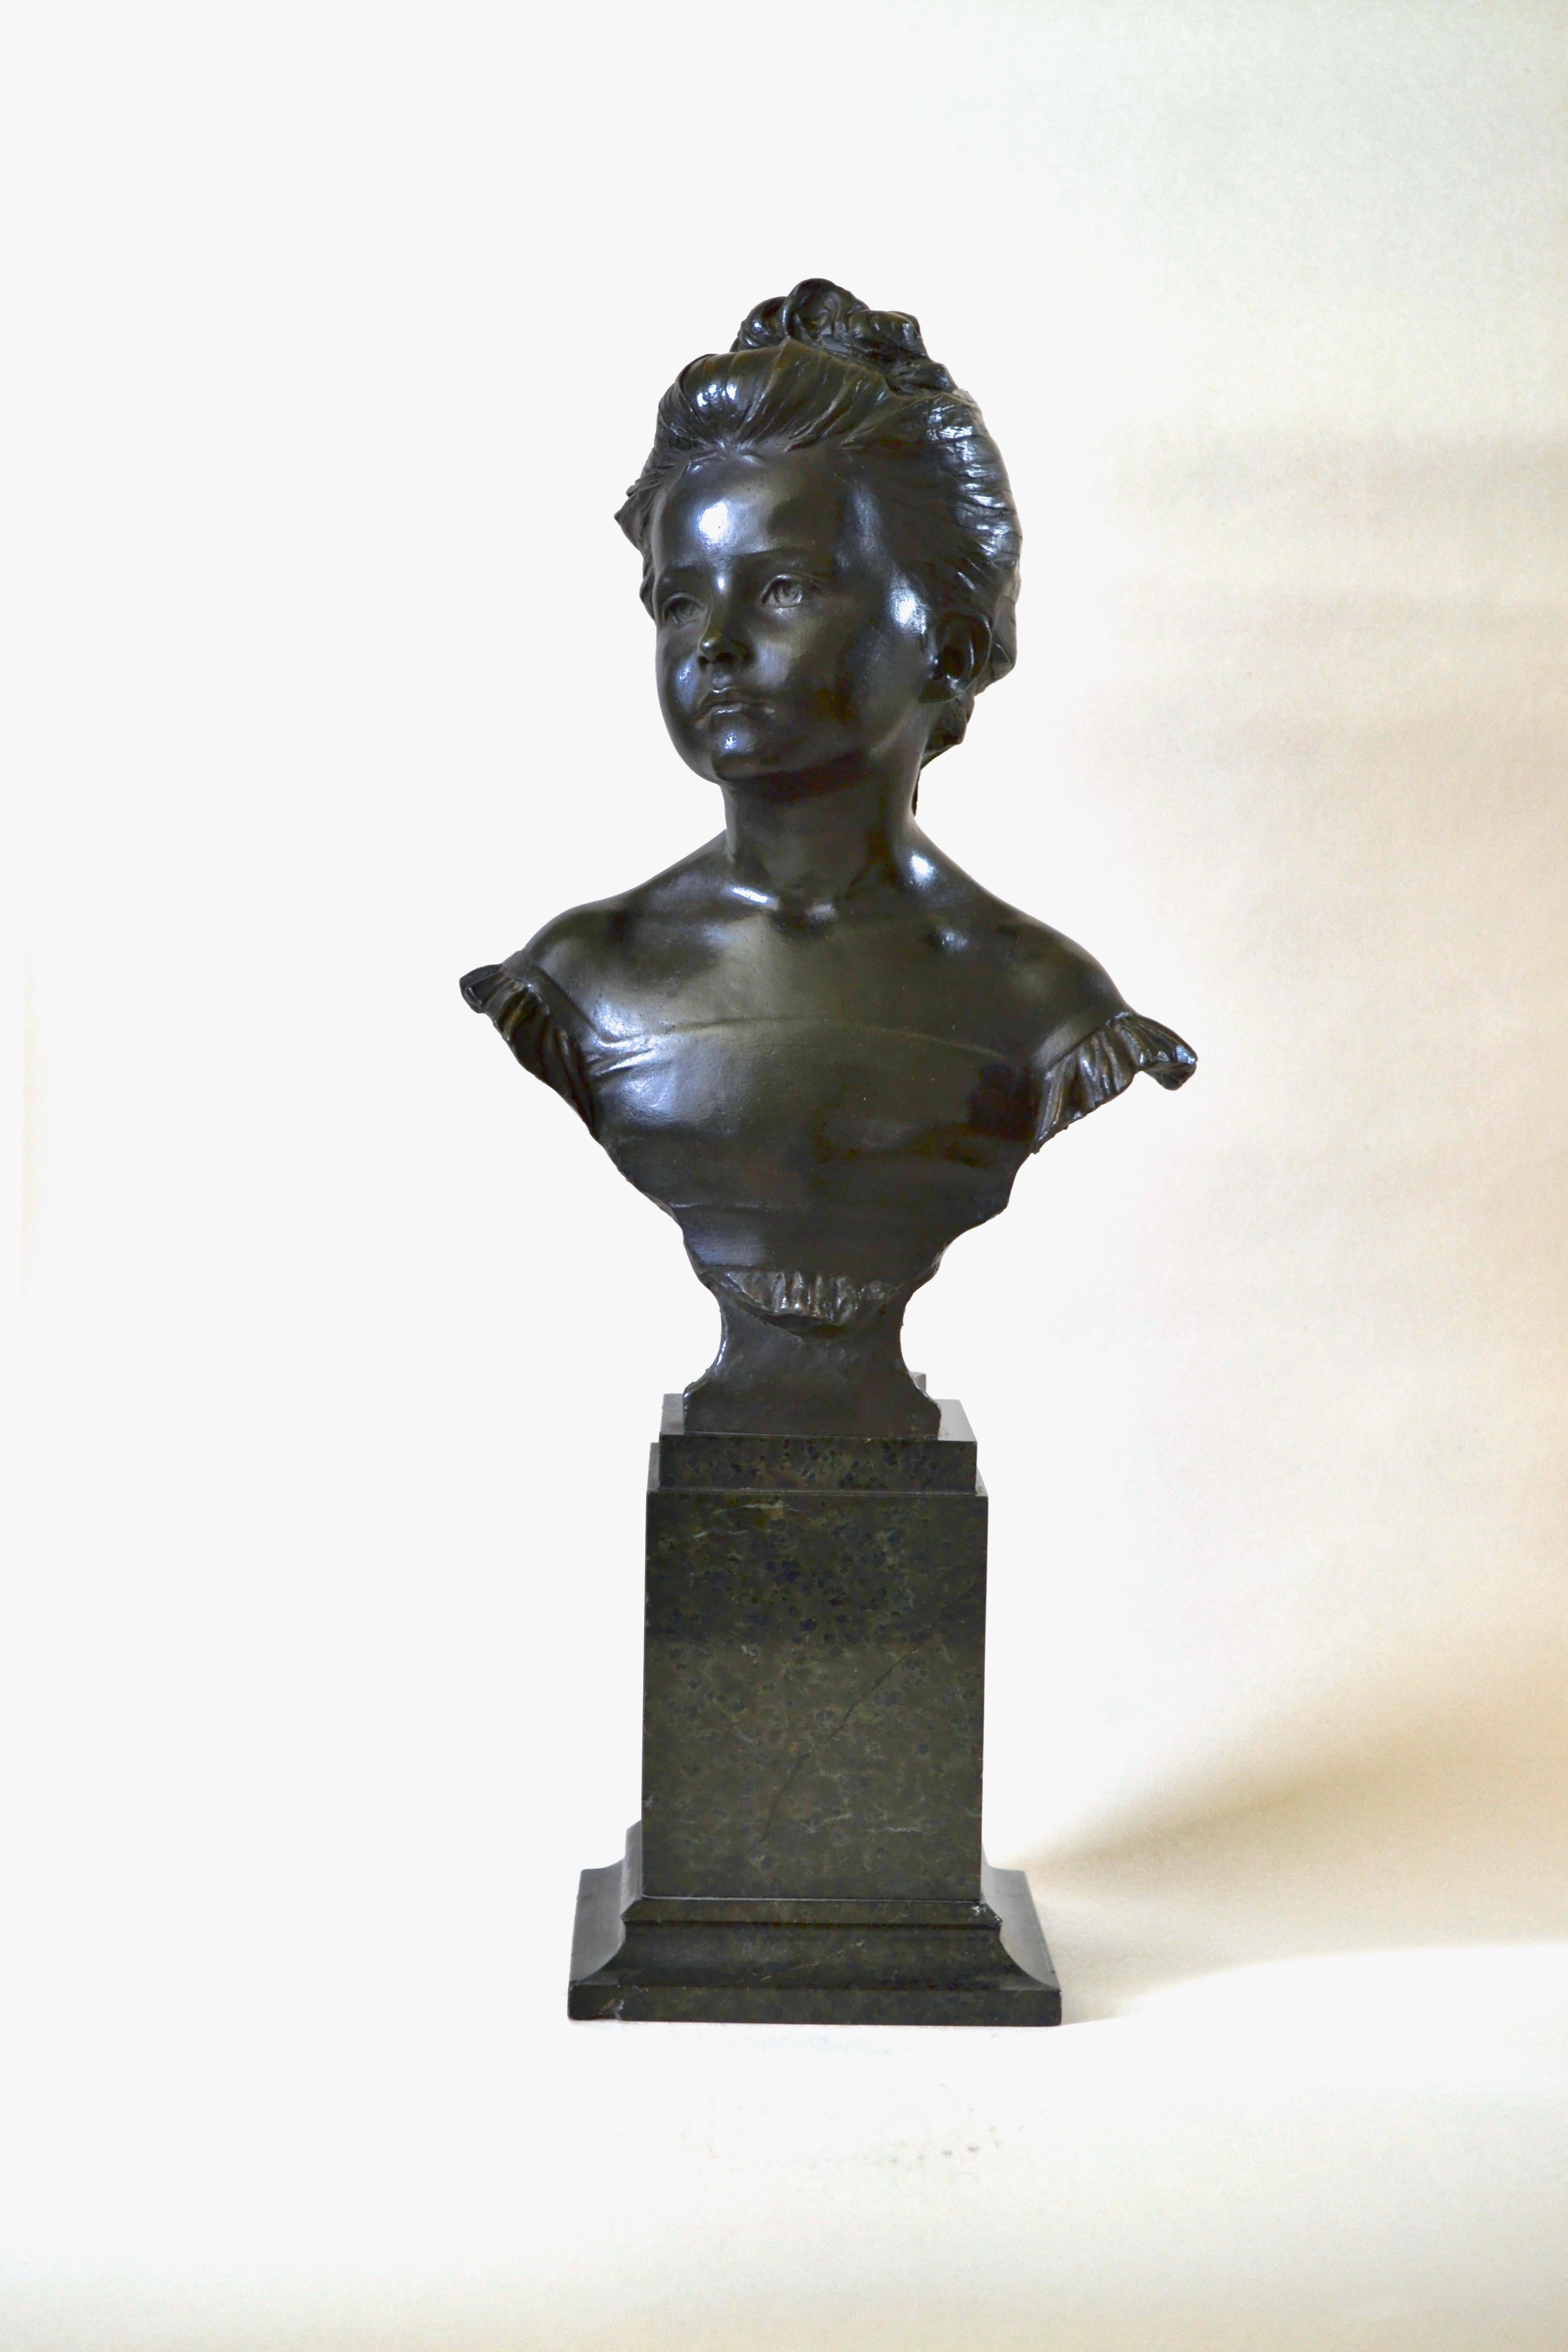 ALFRED DRURY, RA
(1856-1944)

The Age of Innocence

Signed: A DRURY
Bronze on green marble base

Height including base 45.5 cm., 18 in.

Born in Islington, London, Drury was raised in Oxford where his father owned and inn.  He attended Oxford School